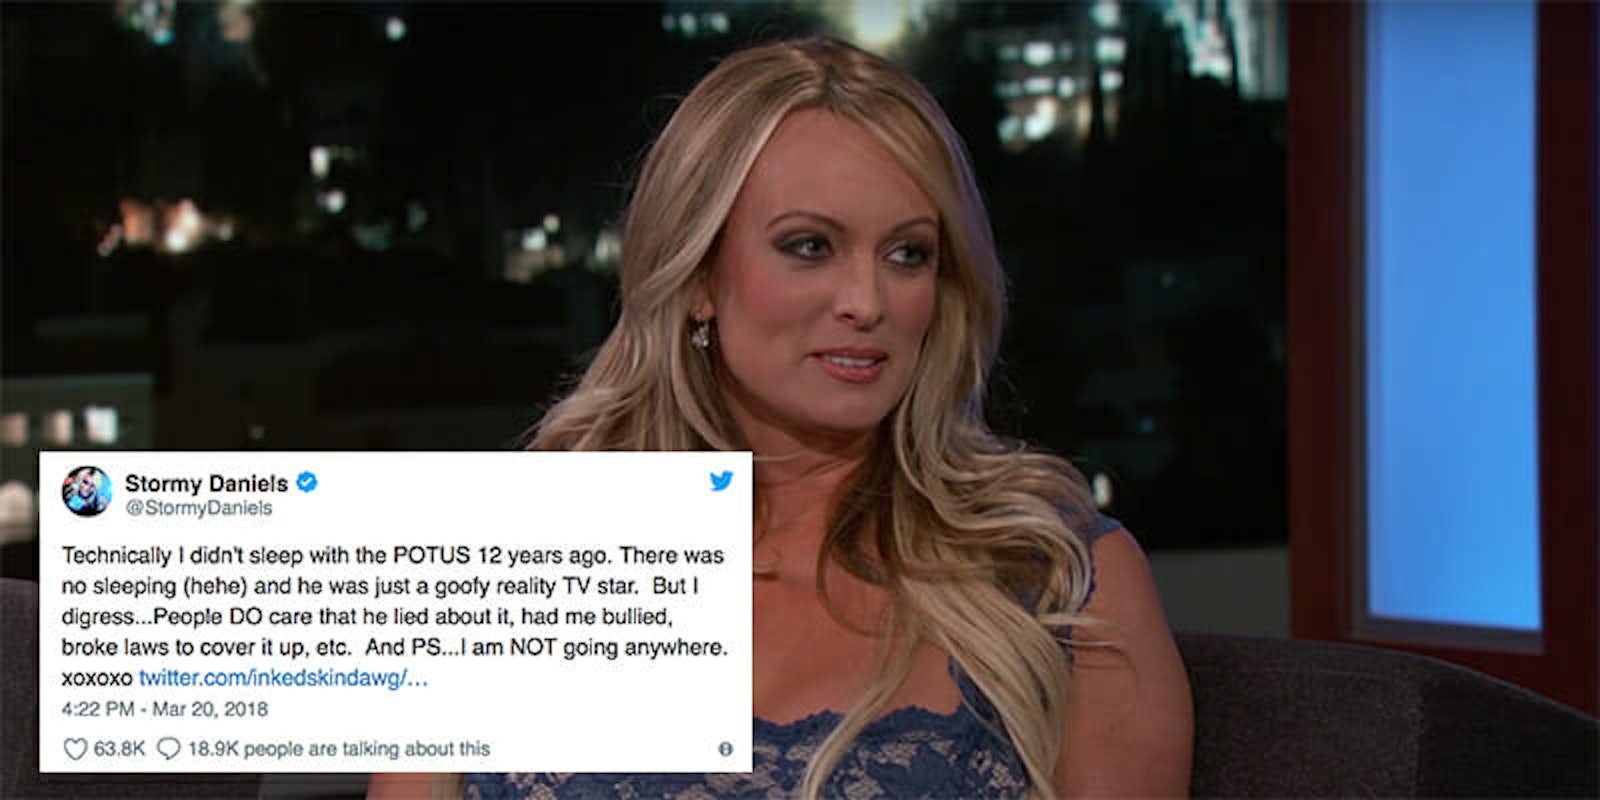 Stormy Daniels tweeted cheekily that she didn't 'technically' sleep with President Donald Trump.